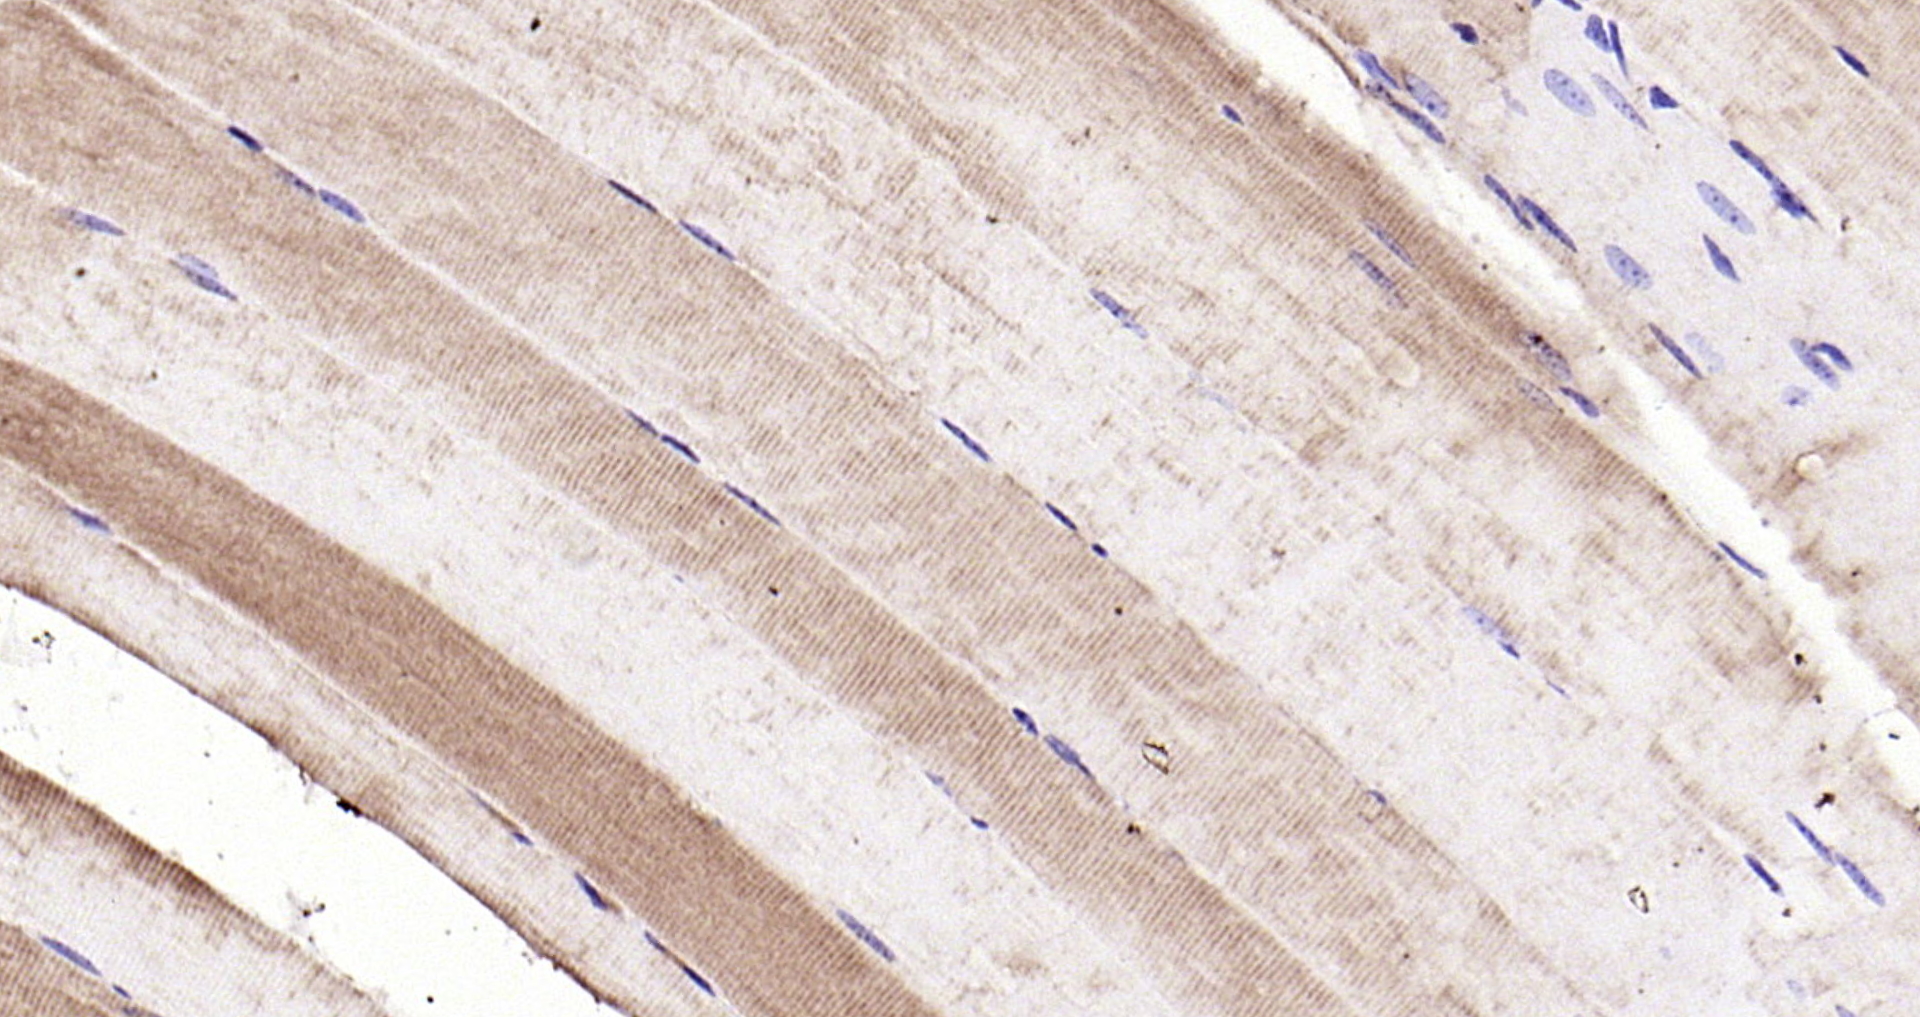 Paraformaldehyde-fixed, paraffin embedded Mouse muscle; Antigen retrieval by boiling in sodium citrate buffer (pH6.0) for 15min; Block endogenous peroxidase by 3% hydrogen peroxide for 20 minutes; Blocking buffer (normal goat serum) at 37°C for 30min; Antibody incubation with Integrin alpha 7 Polyclonal Antibody, Unconjugated (bs-1816R) at 1:200 overnight at 4°C, DAB staining.